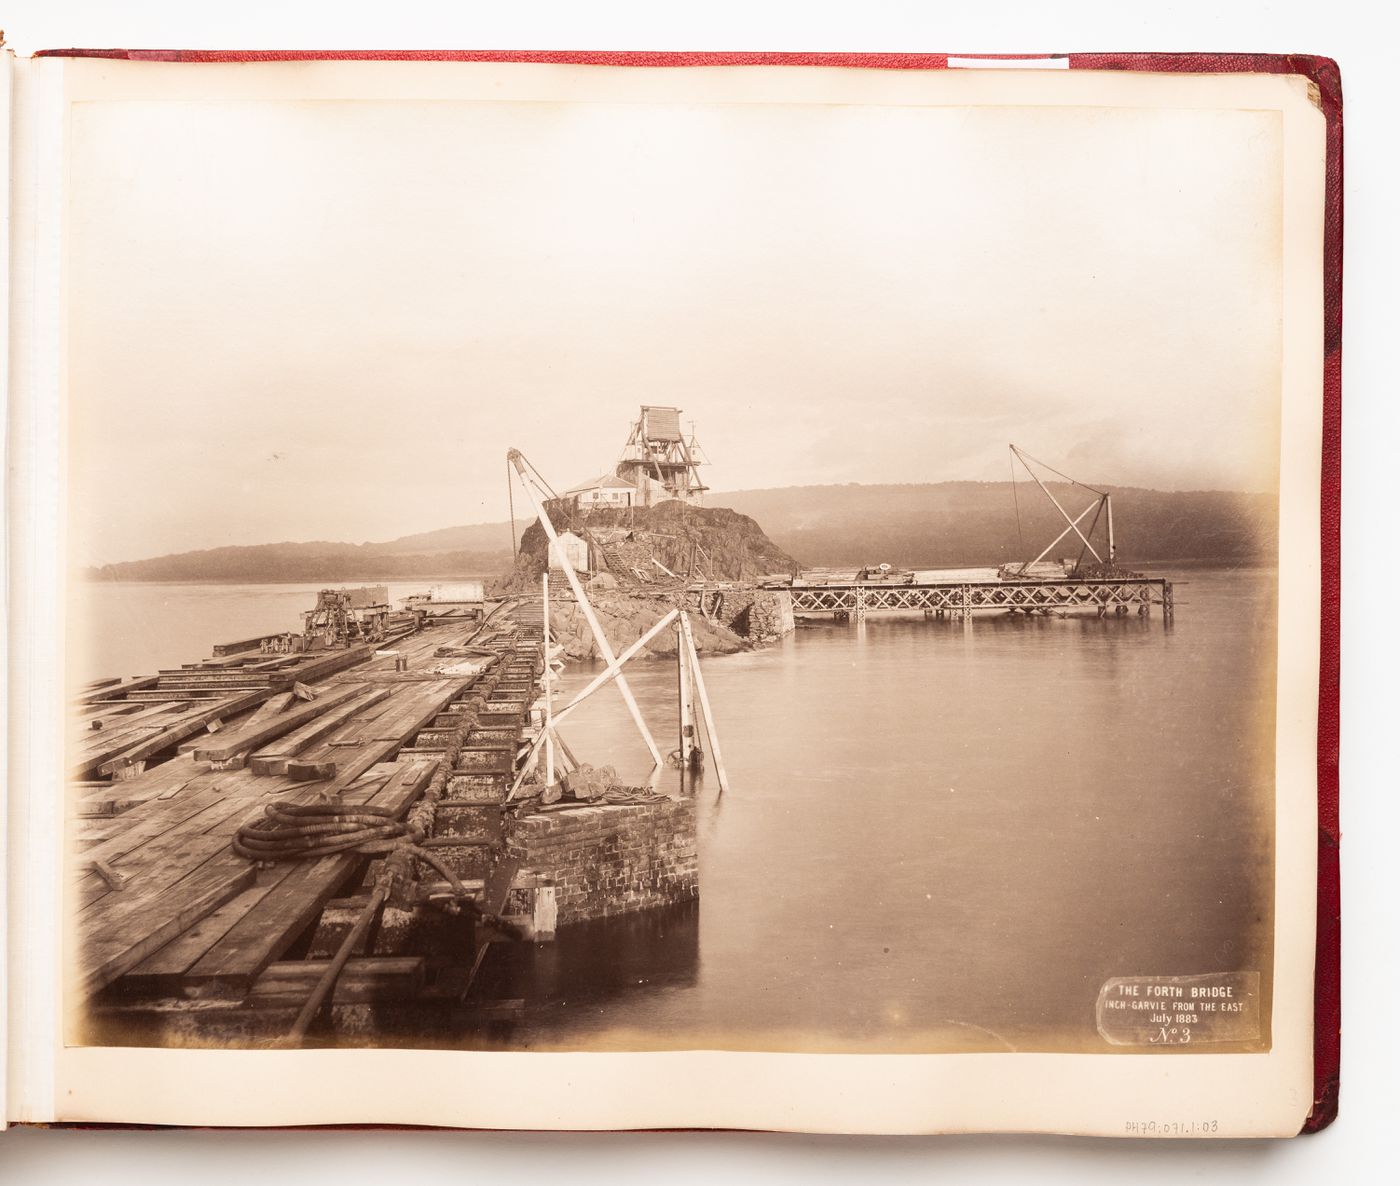 View of a building site for the construction of the Forth Bridge, Firth of Forth, Scotland, United Kingdom